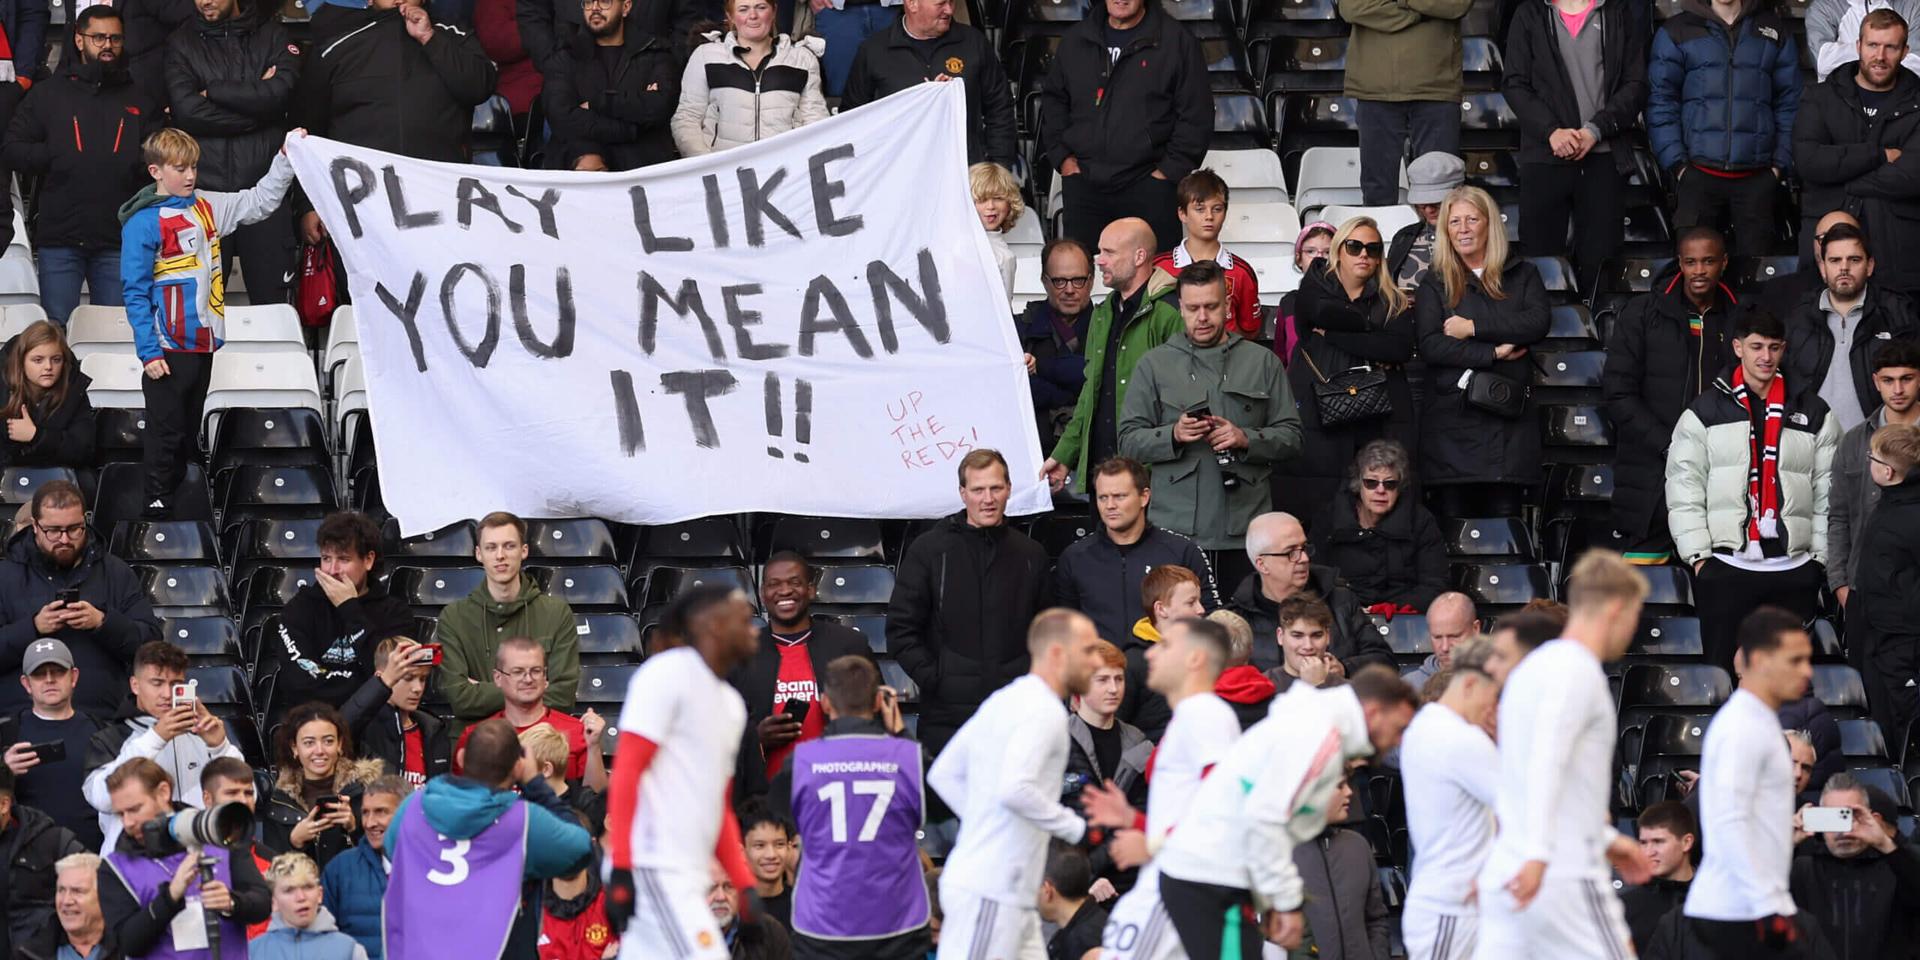 'Play like you mean it!!': The Manchester United fan banner that went viral